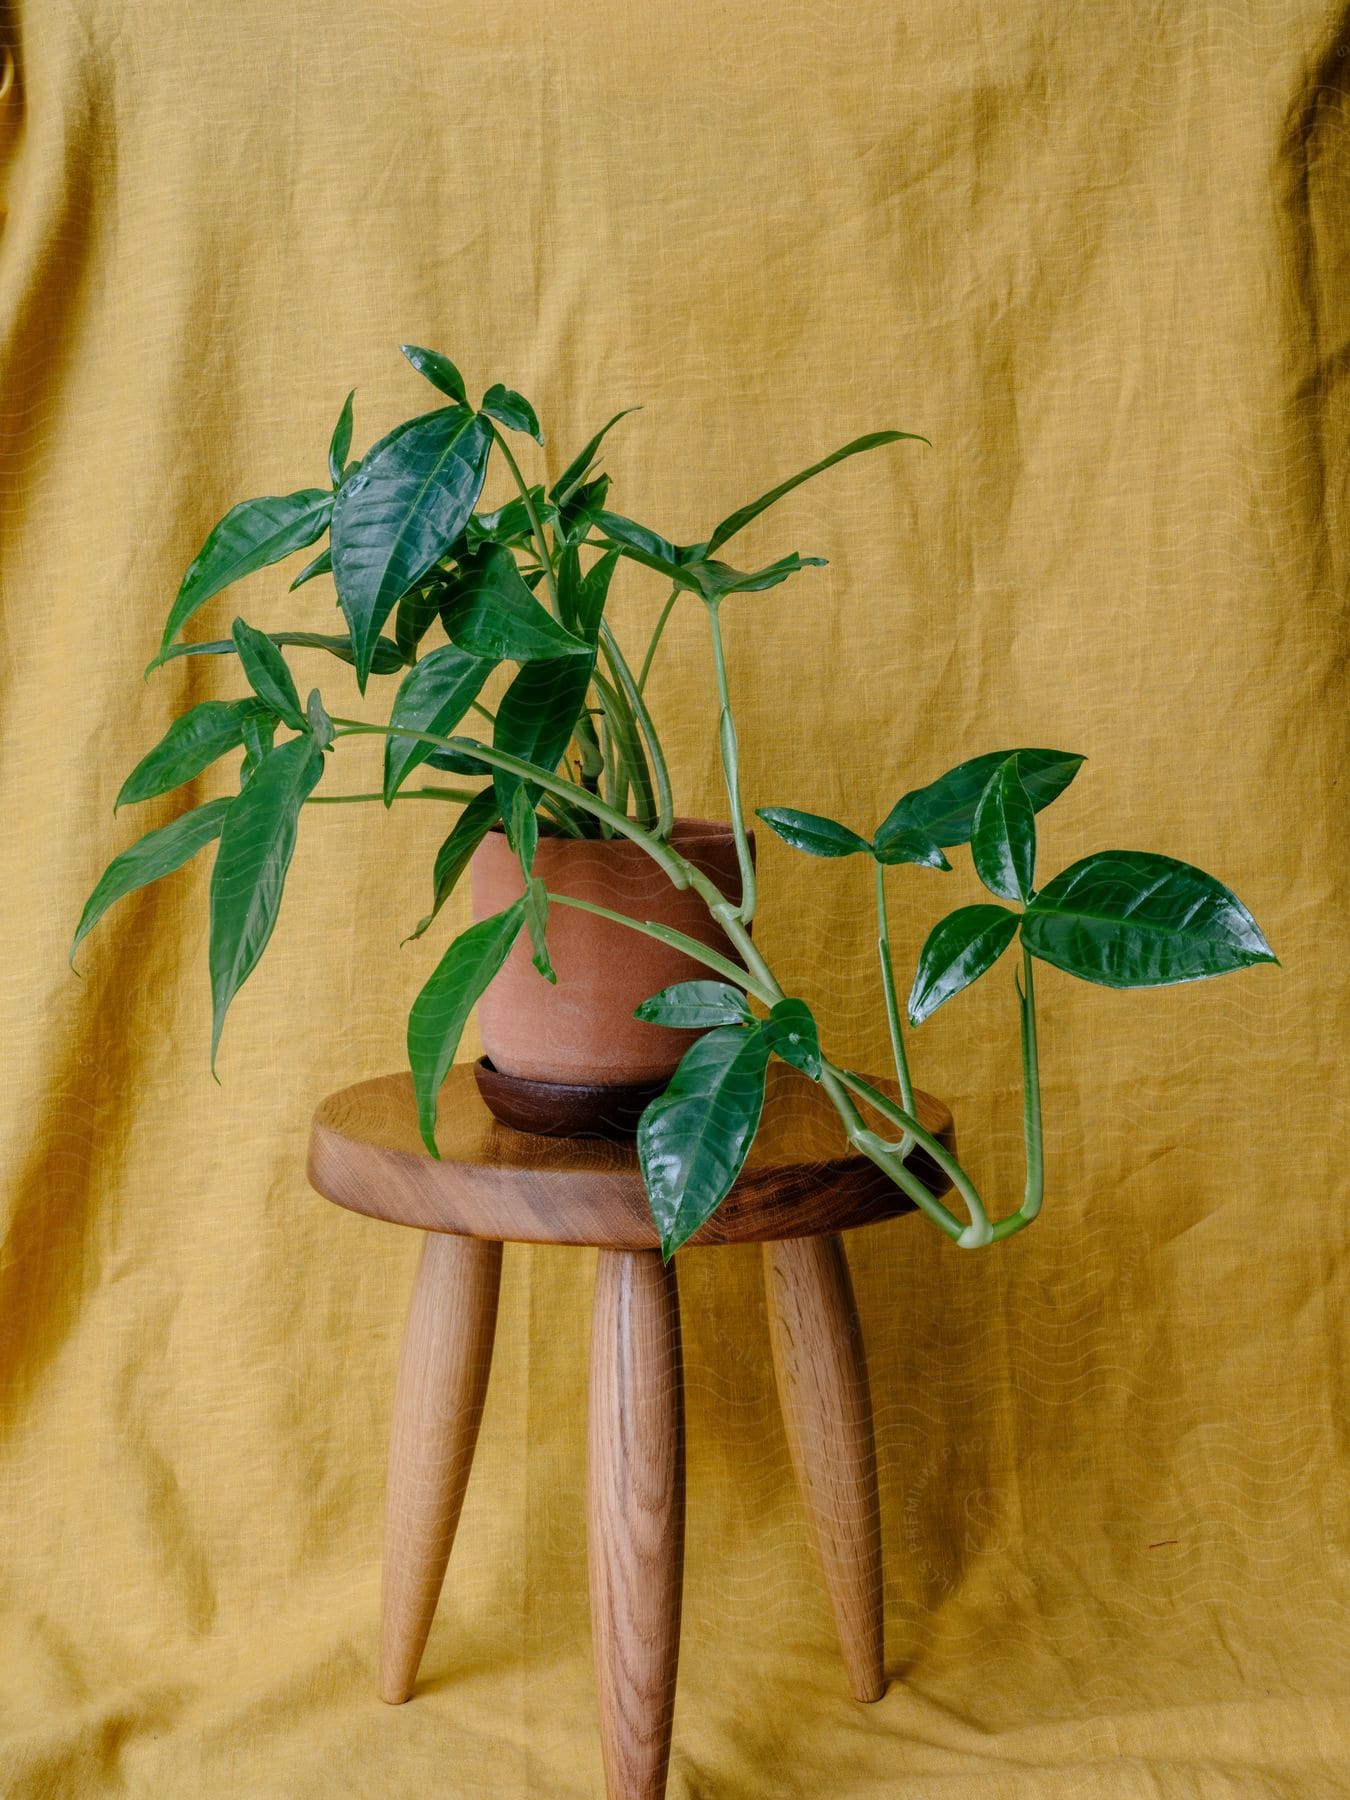 A Wooden Flowerpot With A Houseplant And Leaves